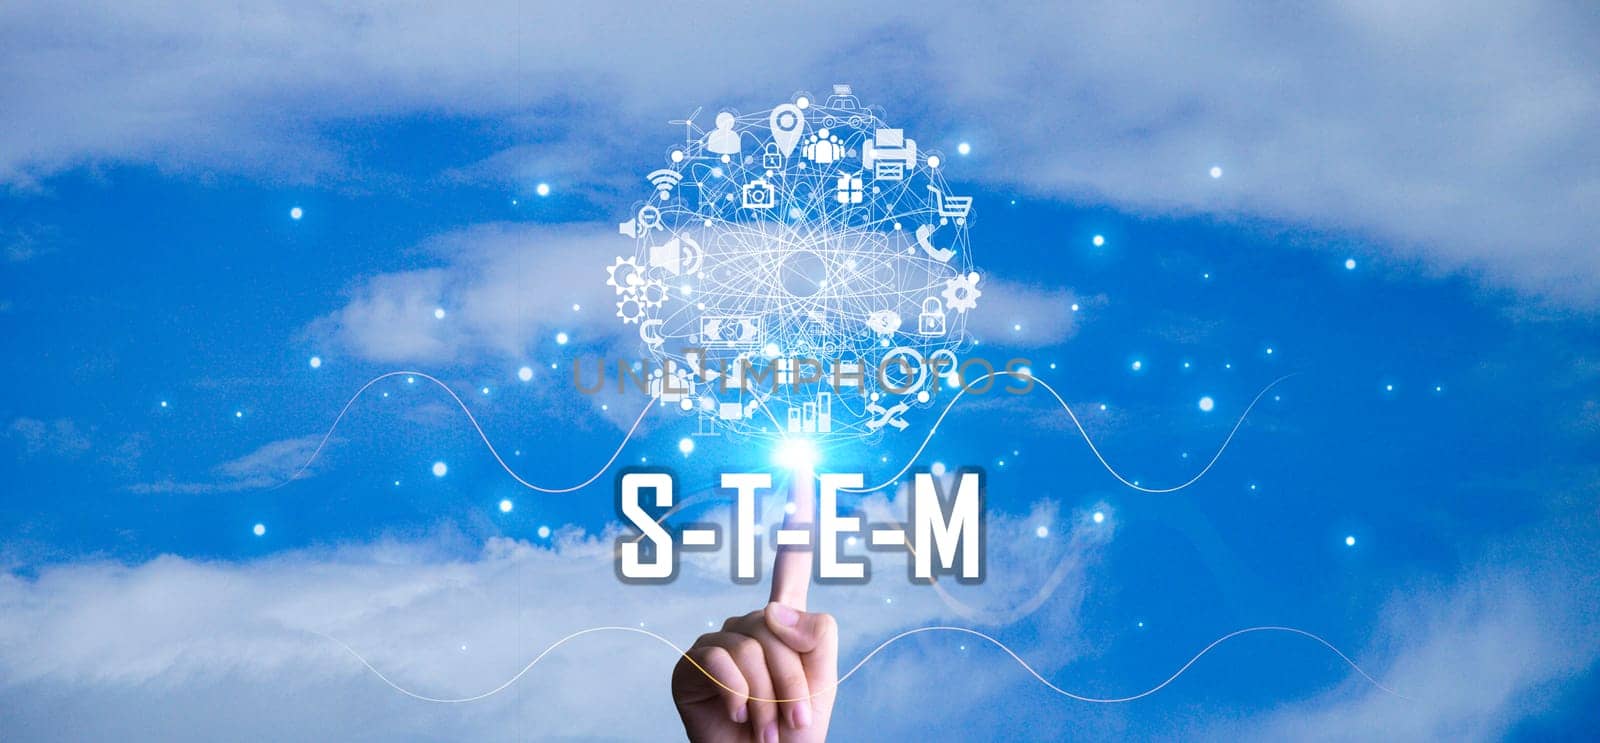 Concept of e-Learning, a learning management system through a network with an emphasis on learners as the center. in teaching and learning Blended style with regular class,stem